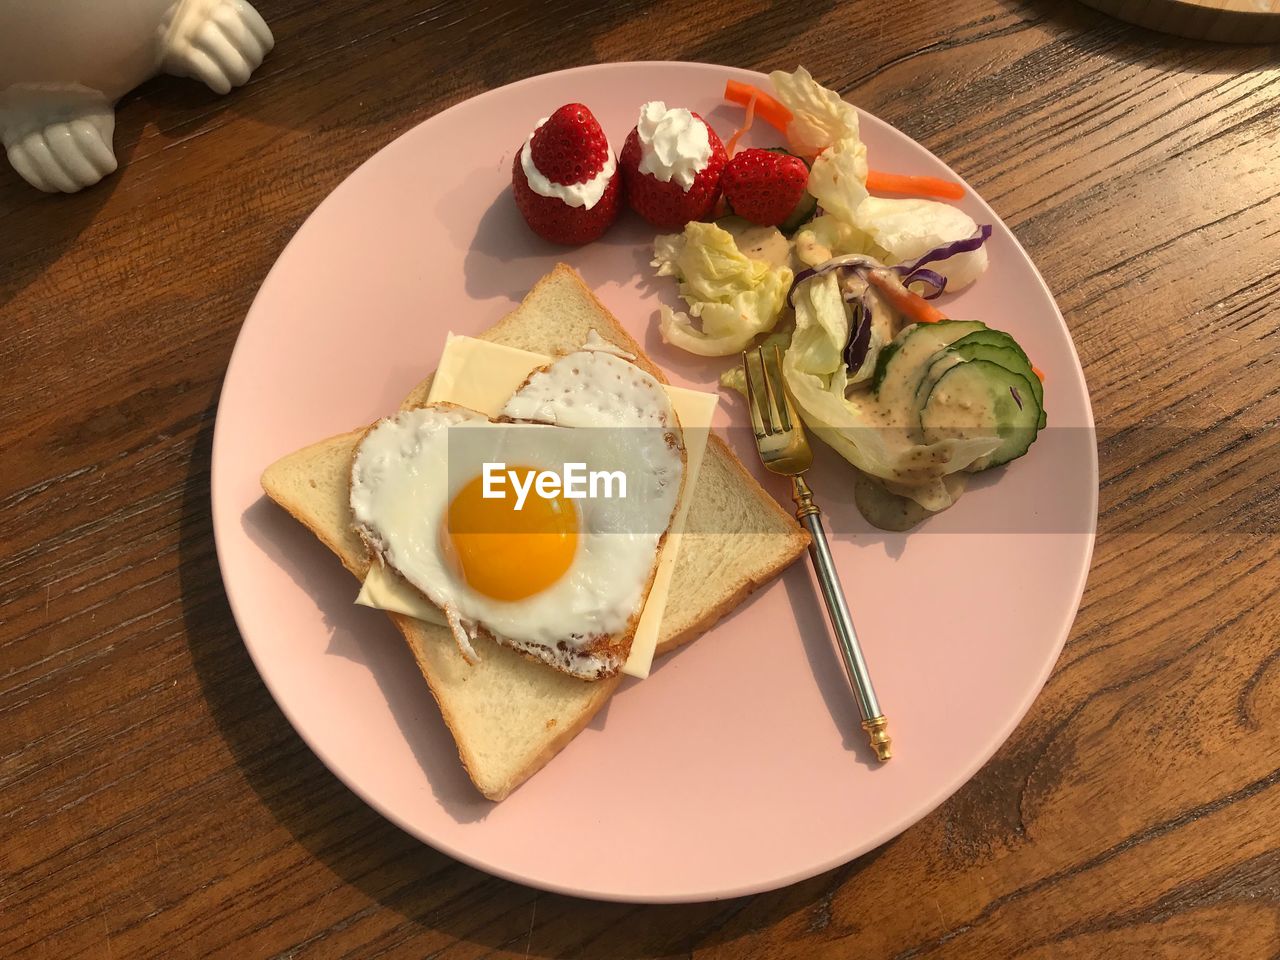 CLOSE-UP OF BREAKFAST SERVED ON PLATE